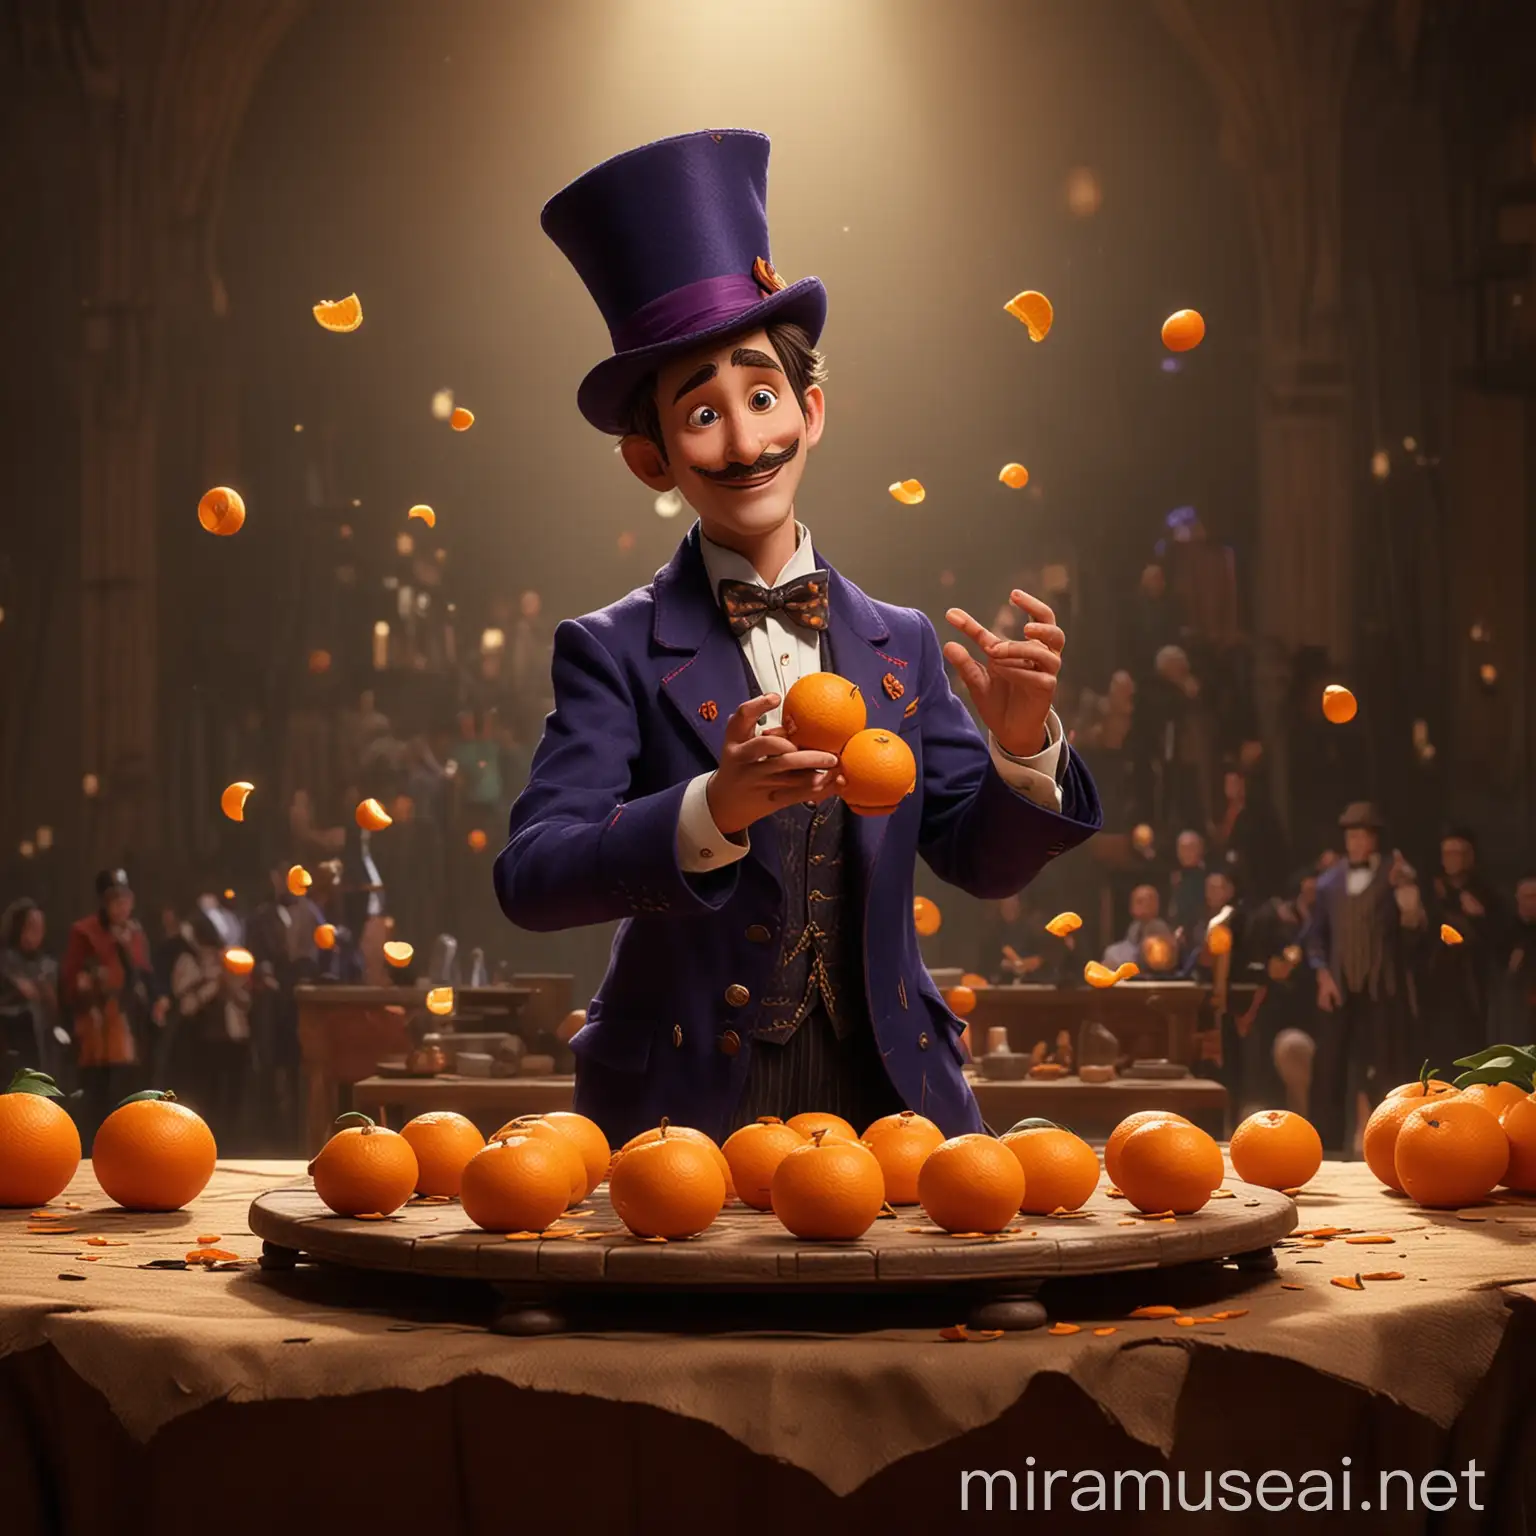 The magician is performing on stage, with several oranges on the table，disney pixar style